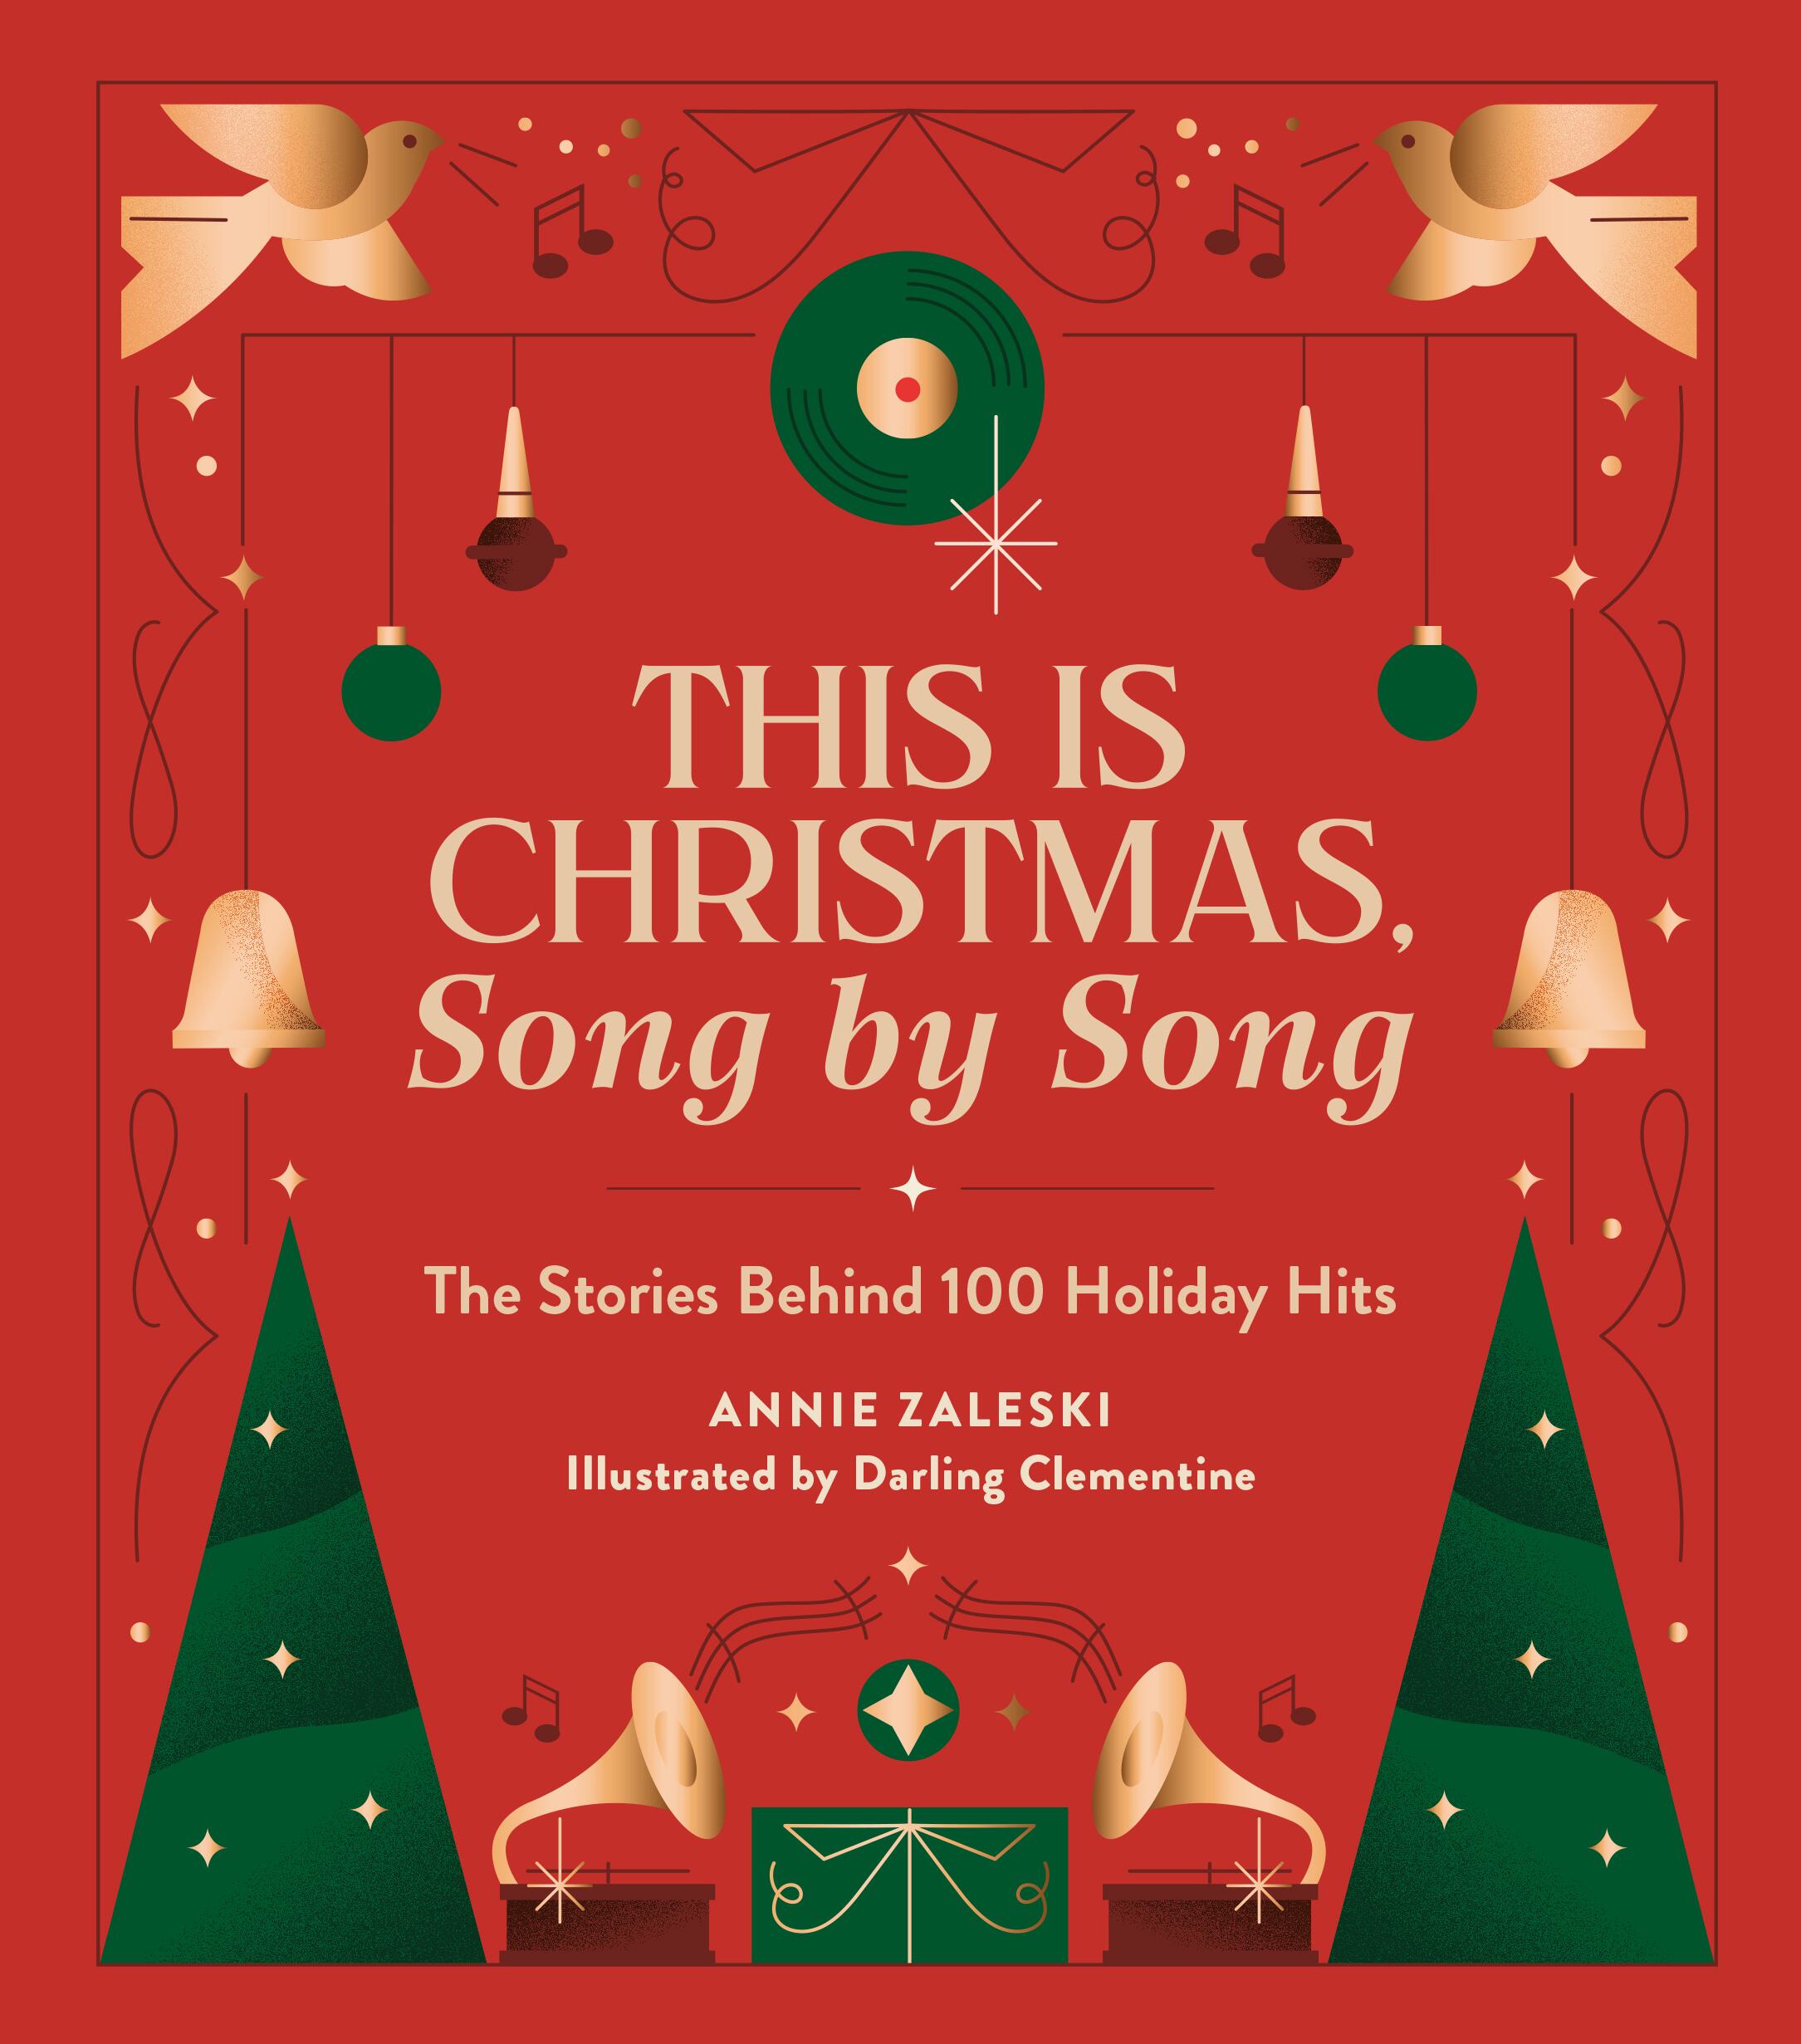 This Is Christmas, Song by Song by Annie Zaleski